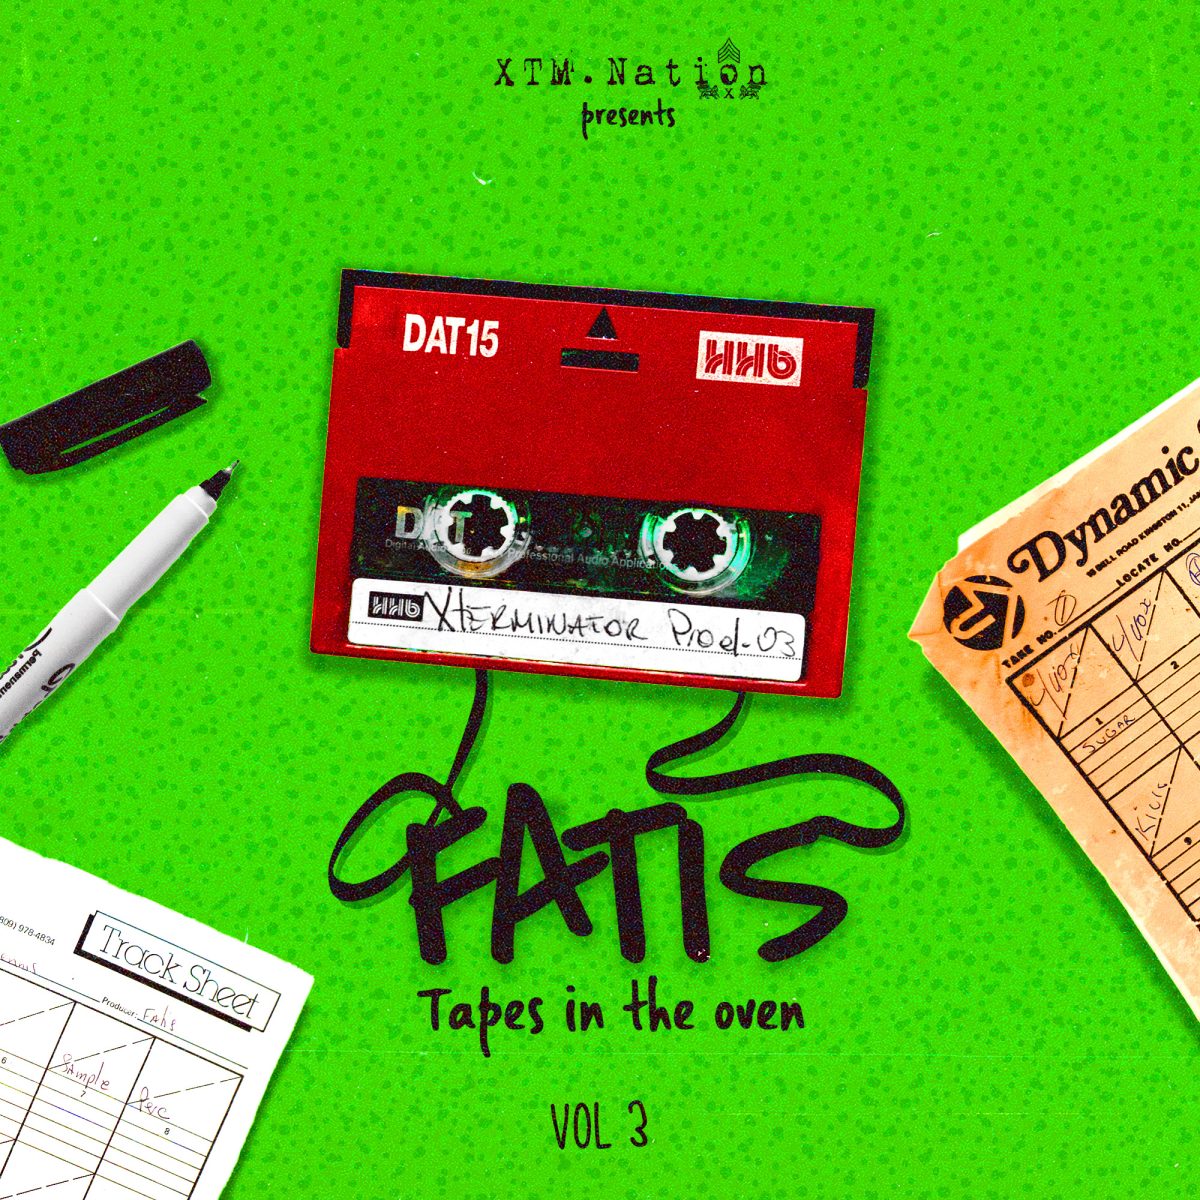 Fatis-Tapes-in-the-Oven-vol-3-square